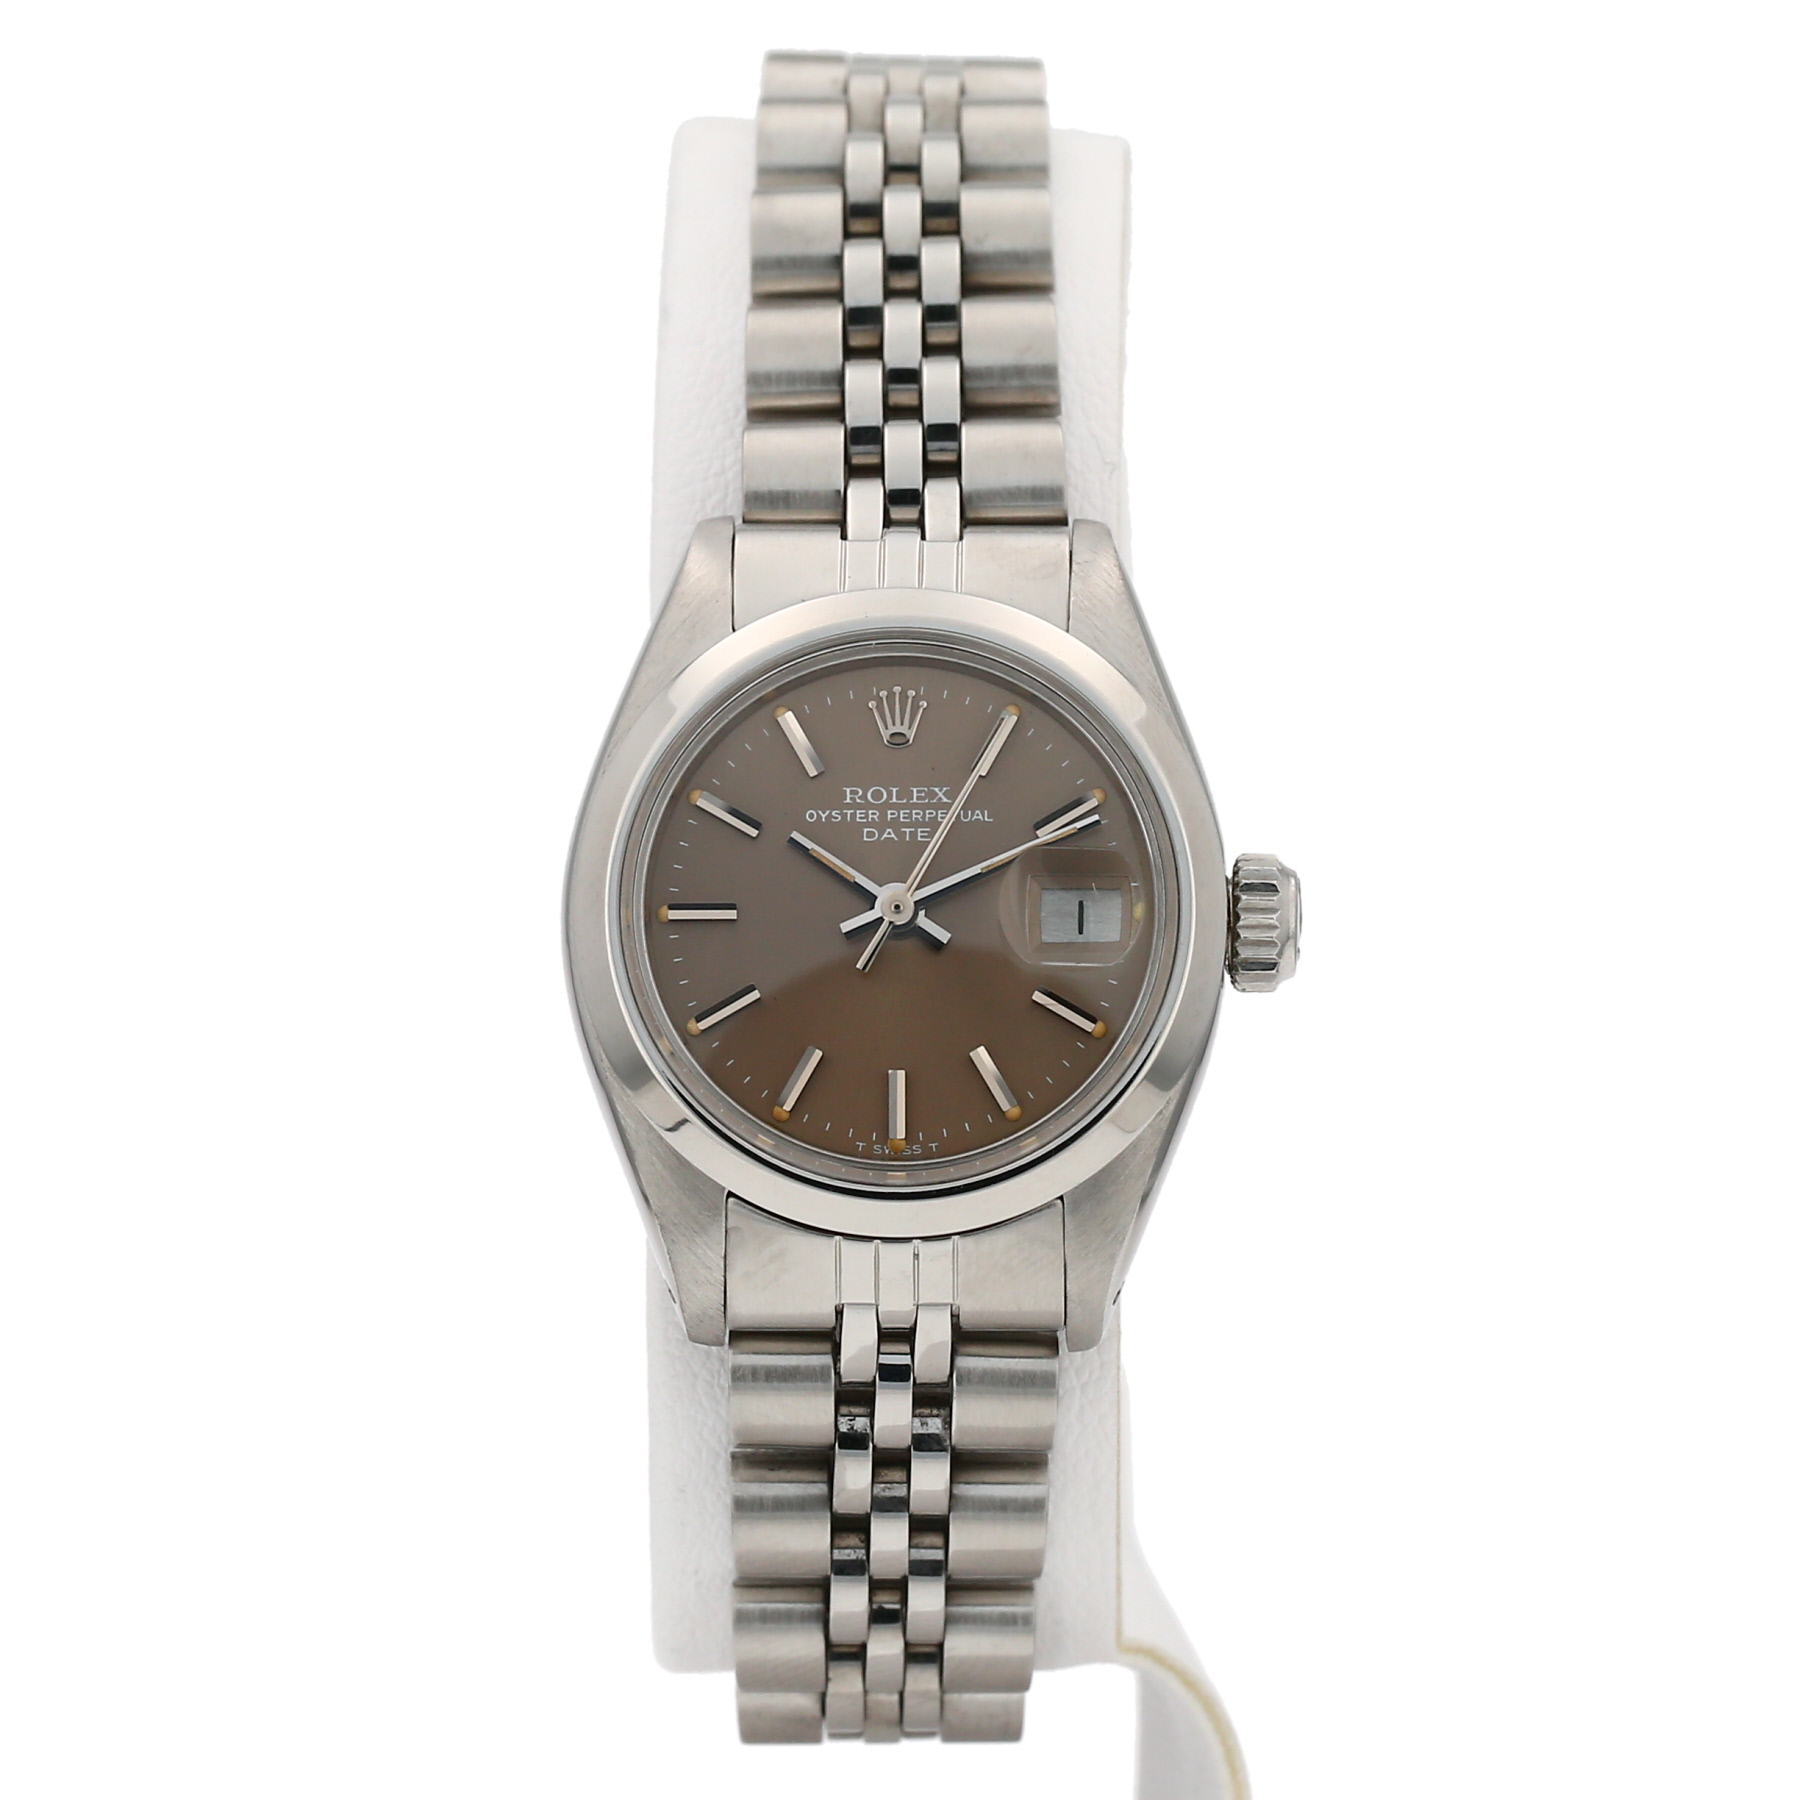 Lady Oyster Perpetual Date In Stainless Steel Ref: 6916